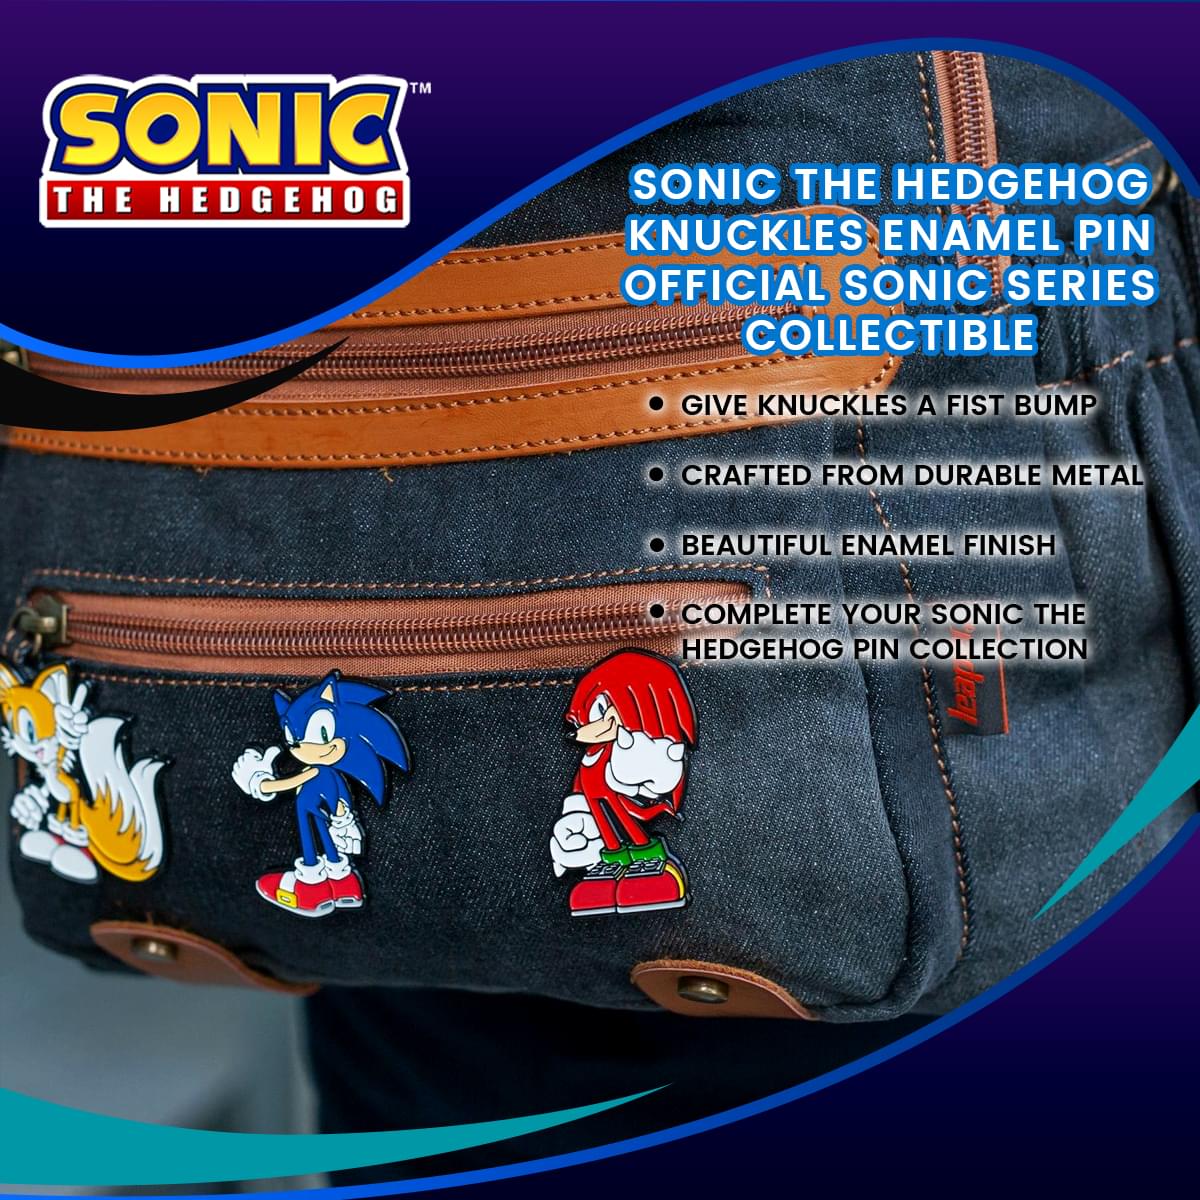 Sonic The Hedgehog Knuckles Enamel Pin | Official Sonic Series Collectible